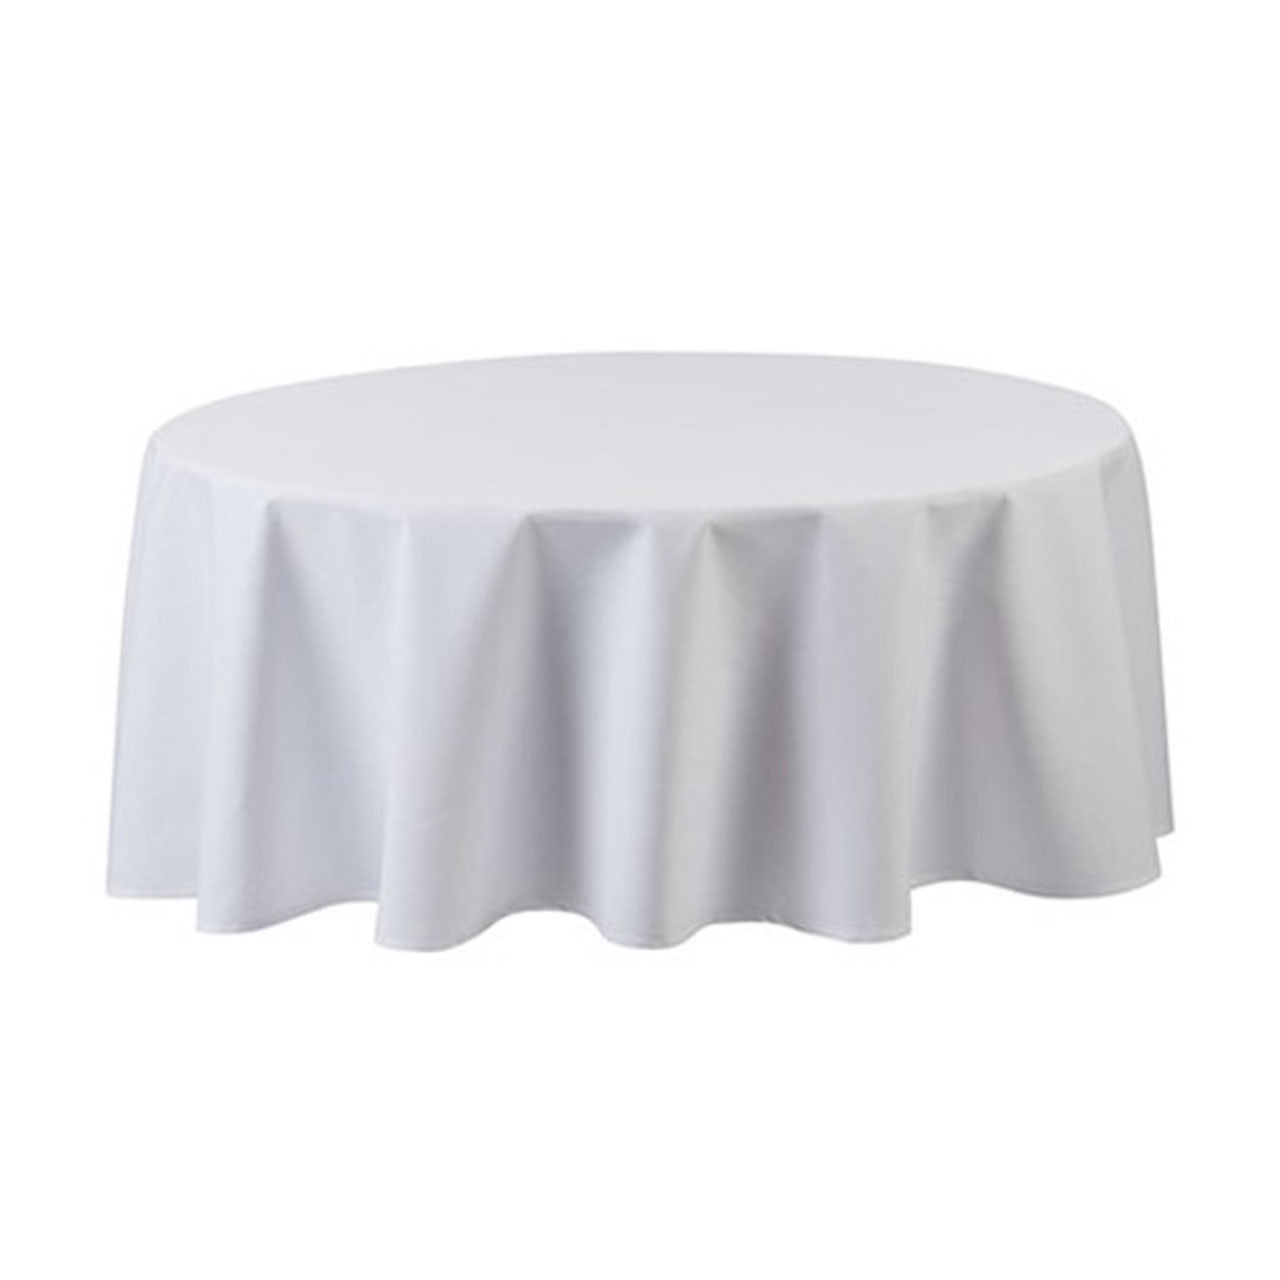 Where do the 120 round tablecloths for Seamless White ship from?